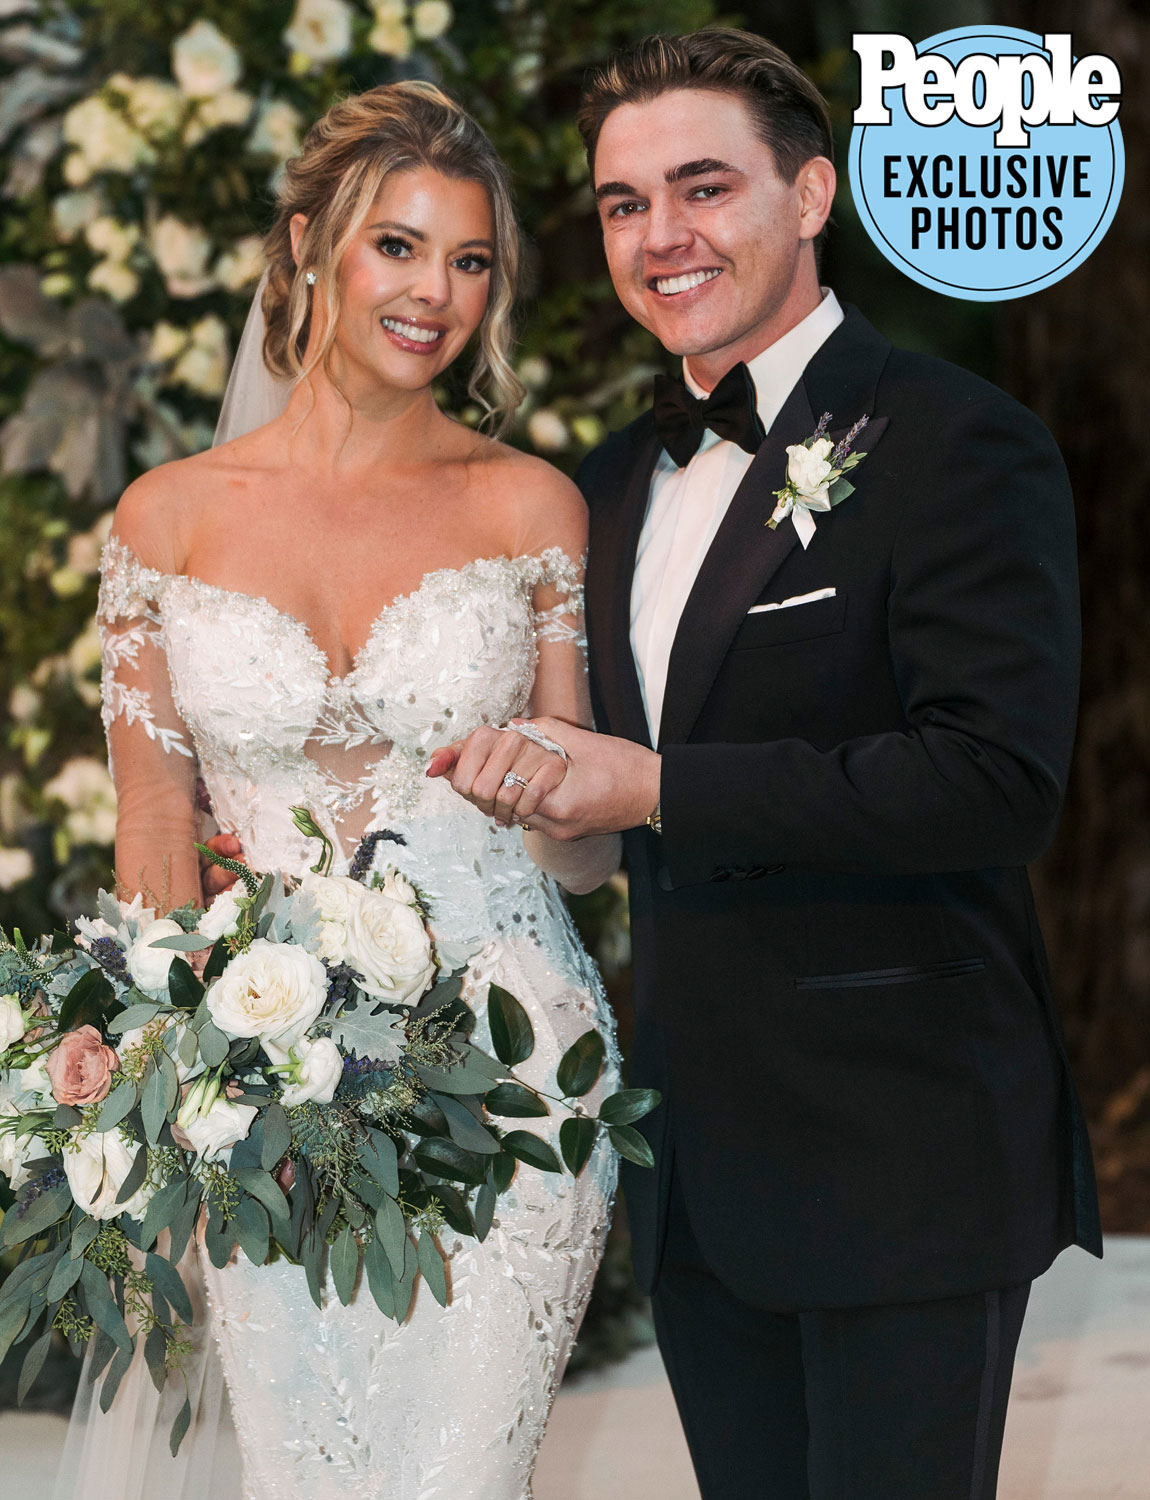 Jesse McCartney marries Katie Peterson in gorgeous ceremony